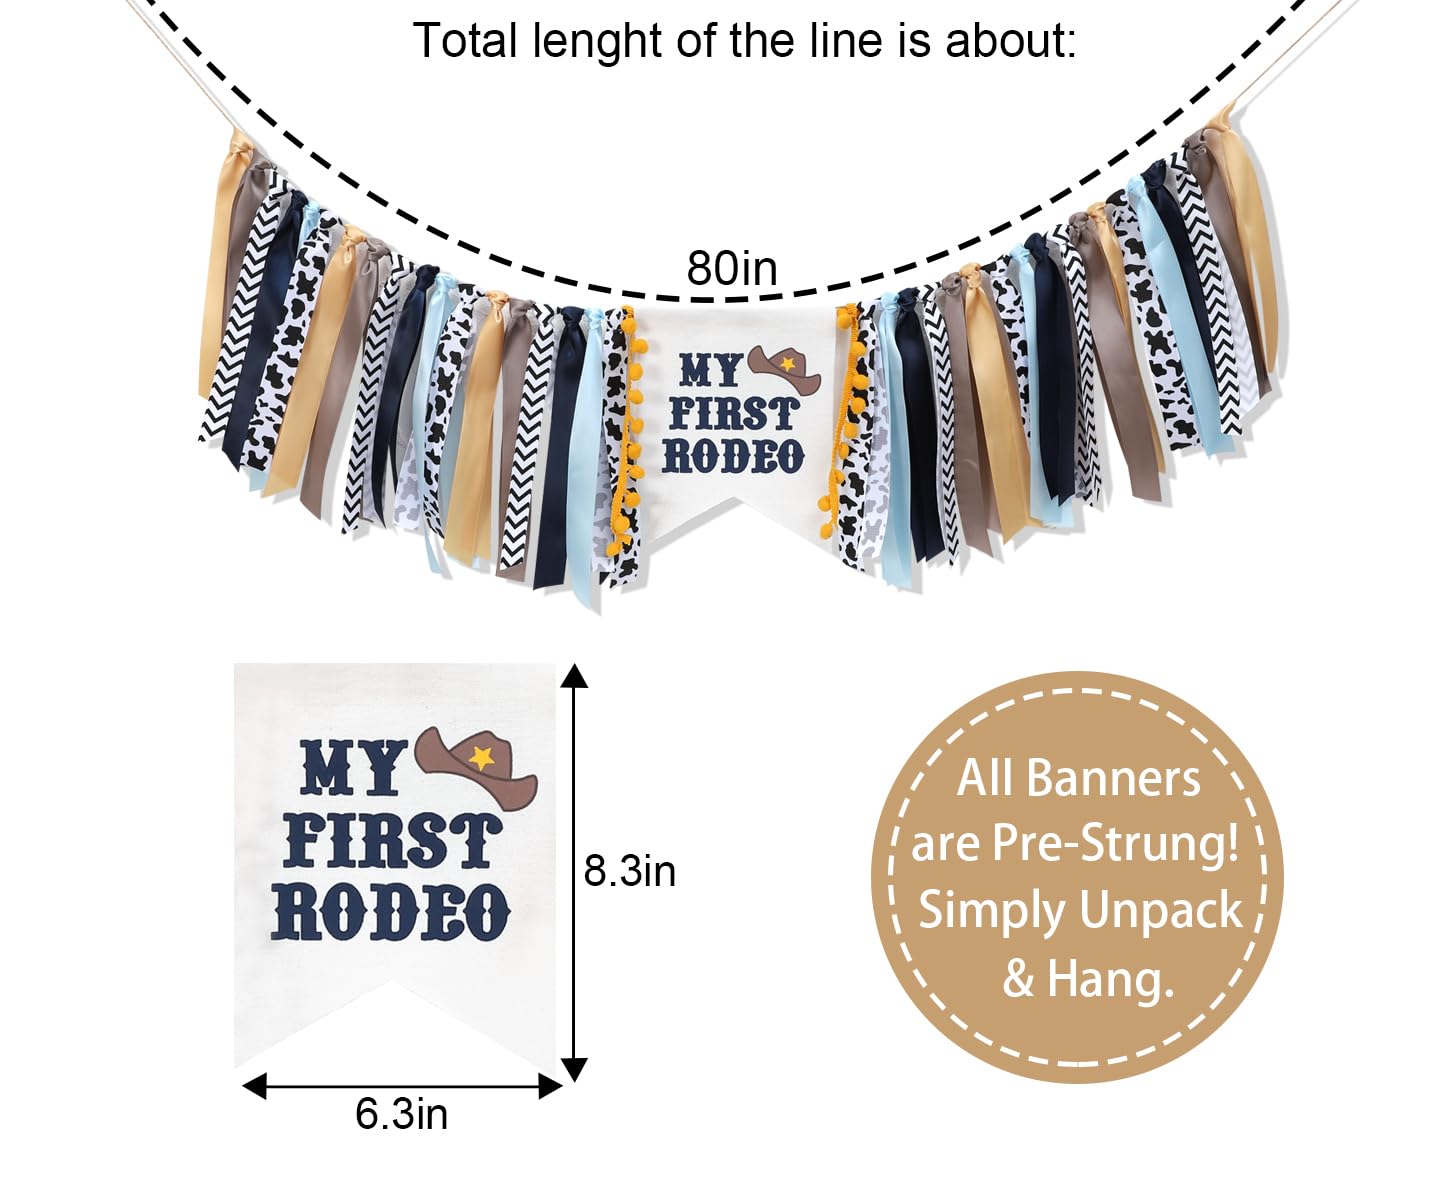 Cowboy 1st Birthday High Chair Banner,My First Rodeo For Kid’S Boy Baby Shower, Barnyard Cow 1st Birthday Party Highchair Decoration Cake Smash, Western Cowboy Backdrop Garland For Photo Props